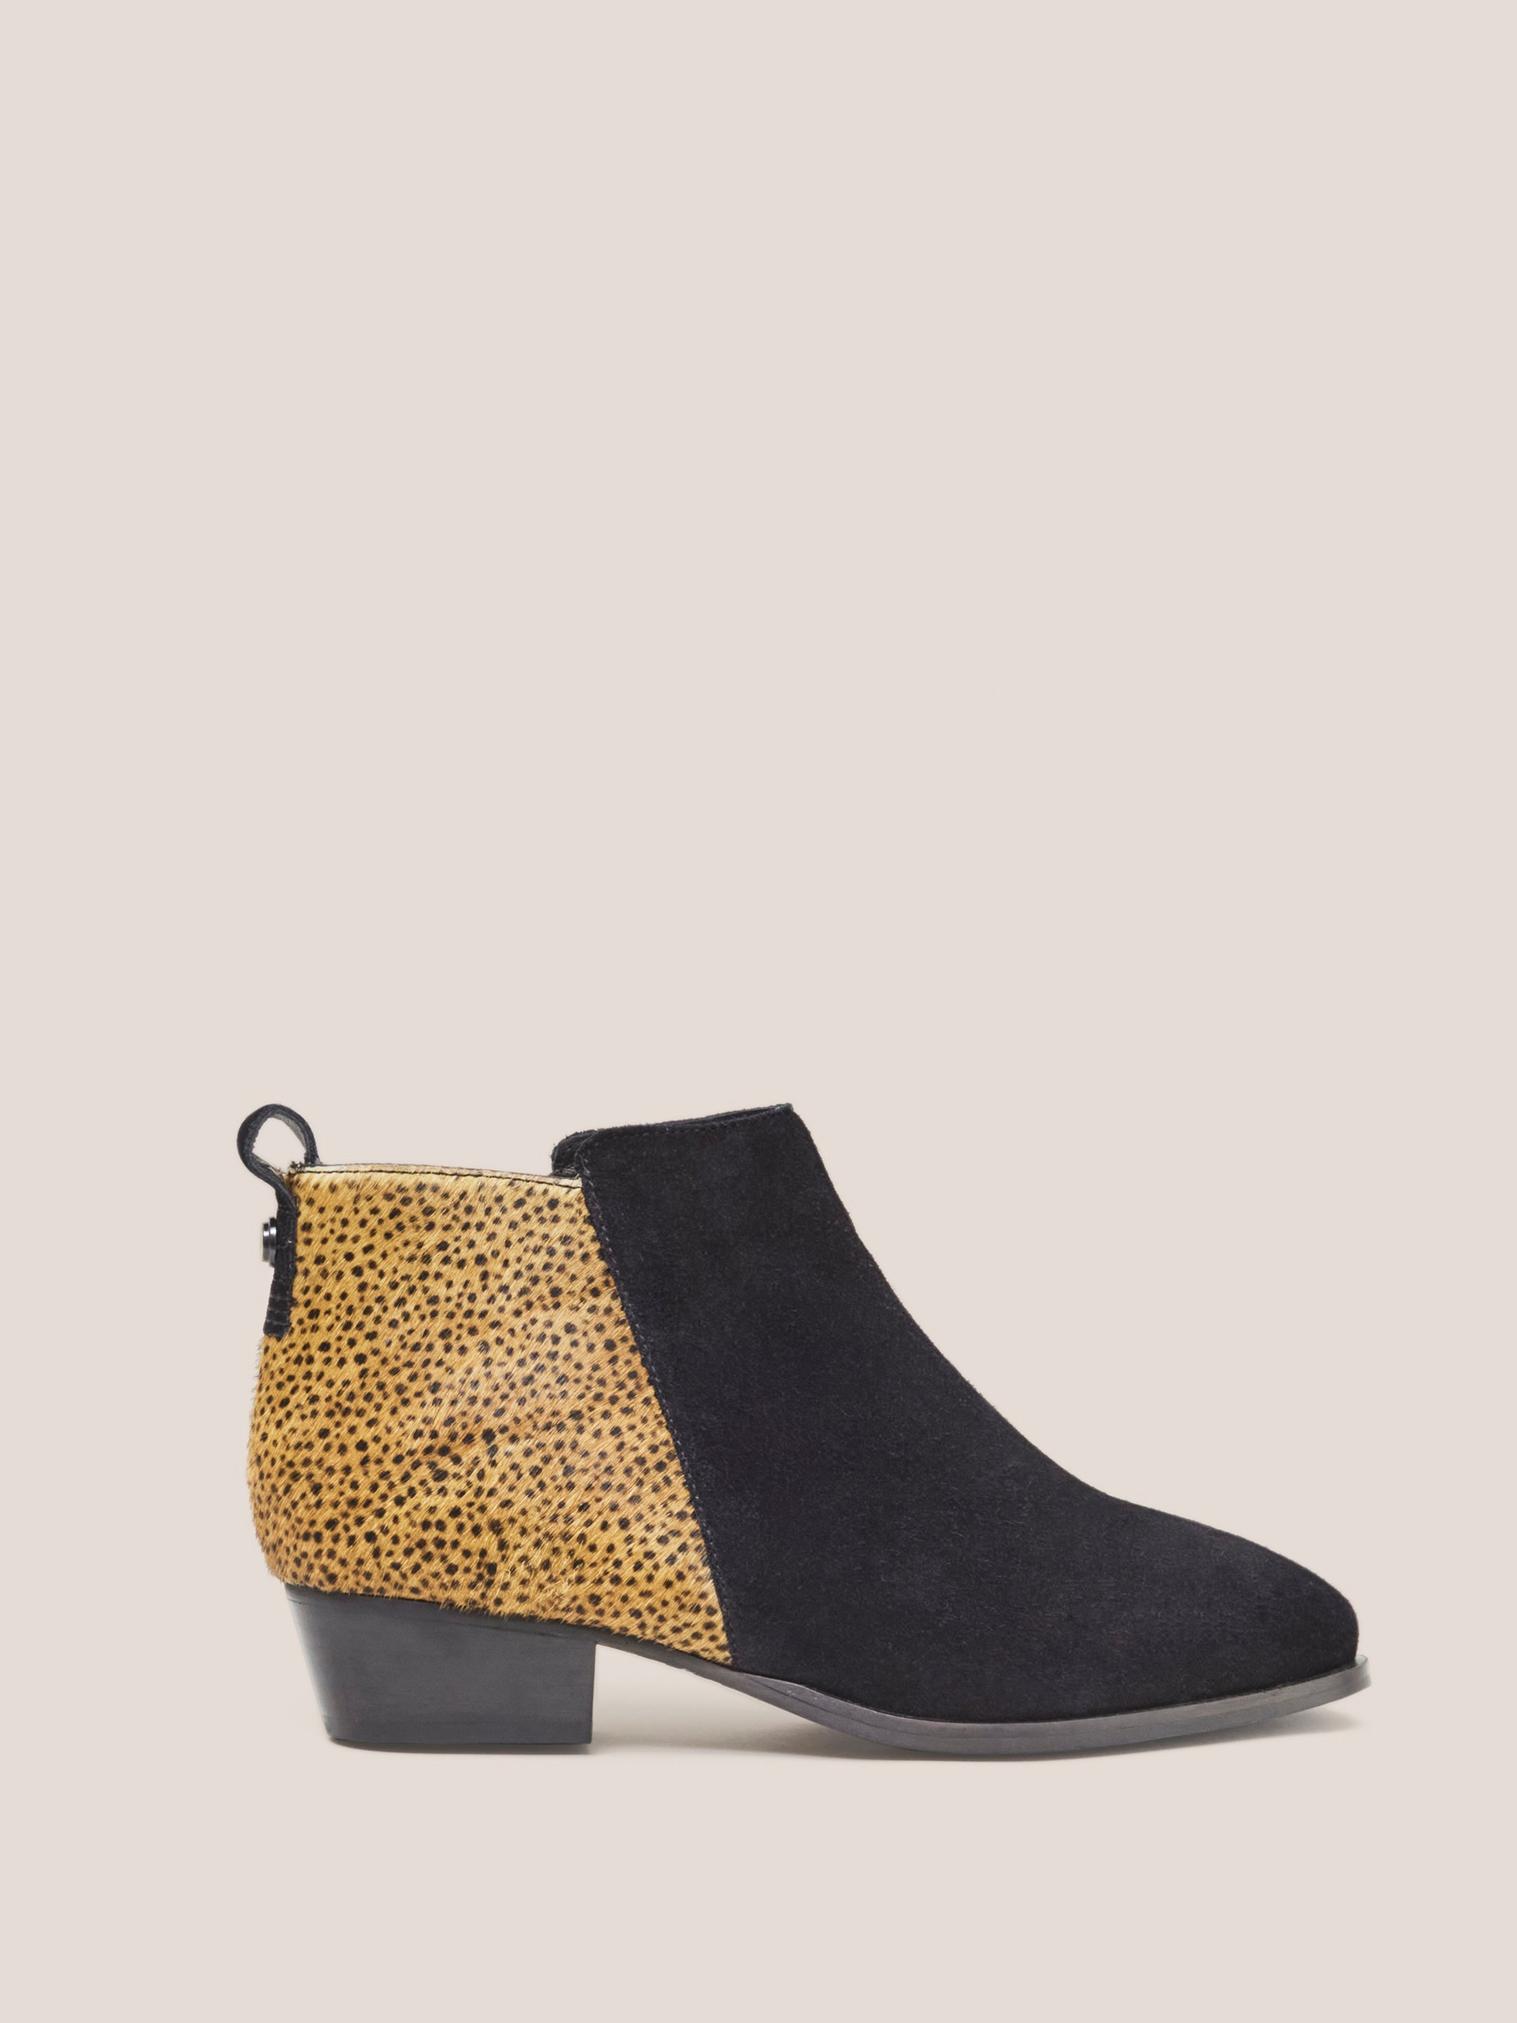 Willow Suede Pony Ankle Boot in BLK PR - MODEL FRONT